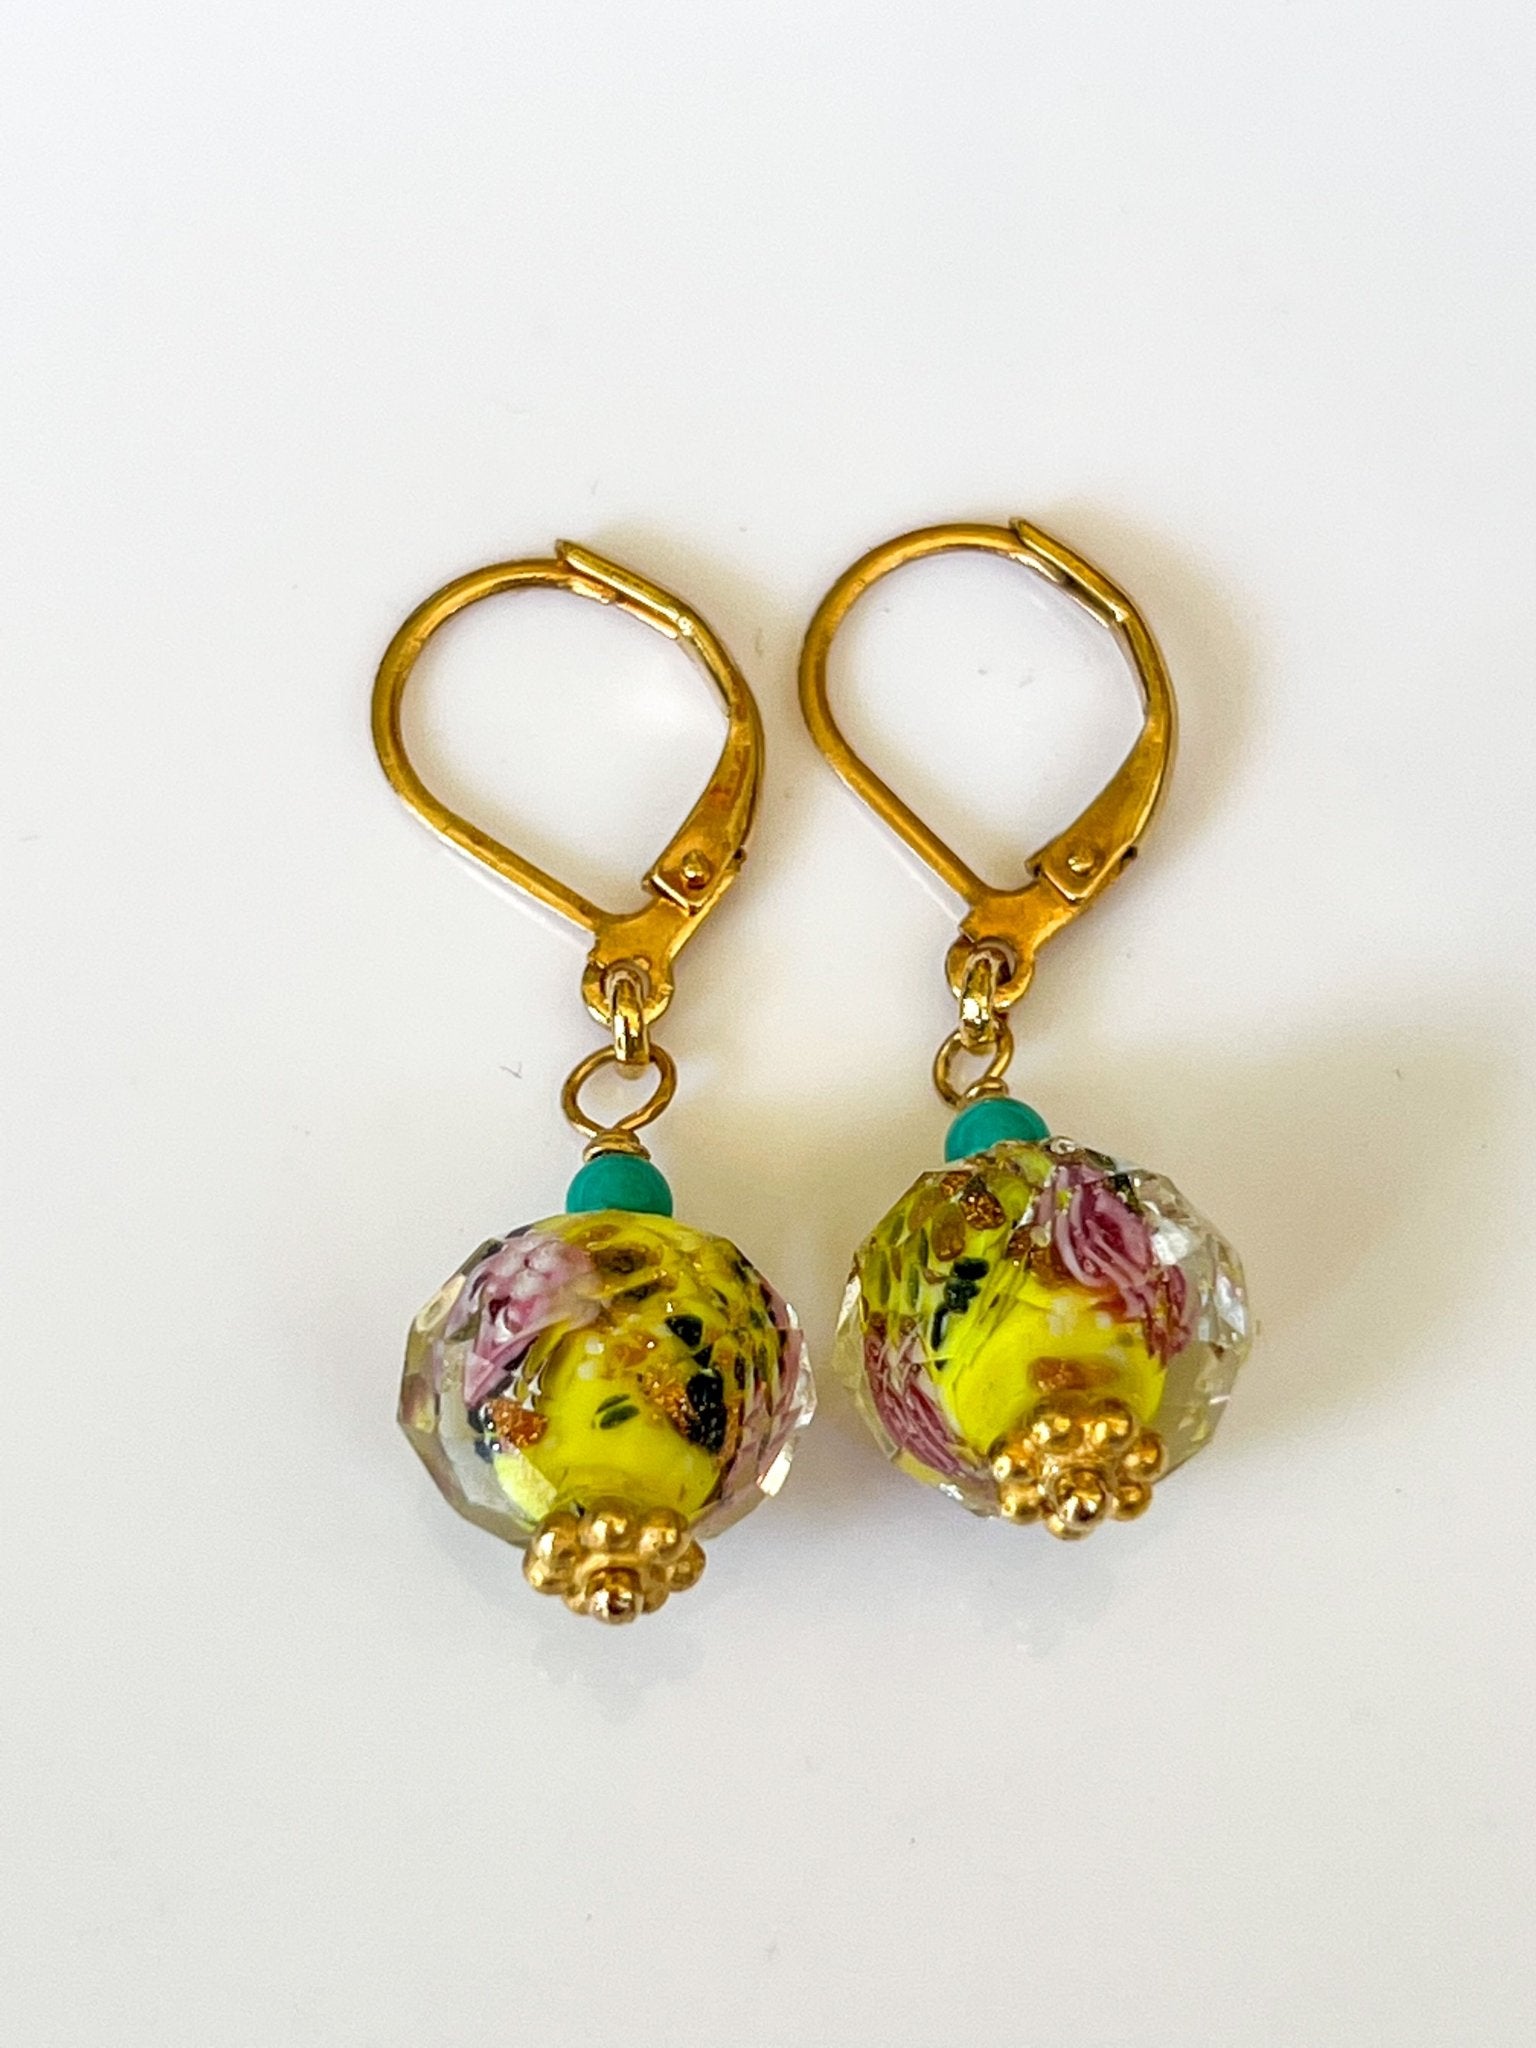 Yellow Peking Glass Floral Gold Charm Earrings with Green Turquoise by Sage Machado - The Sage Lifestyle